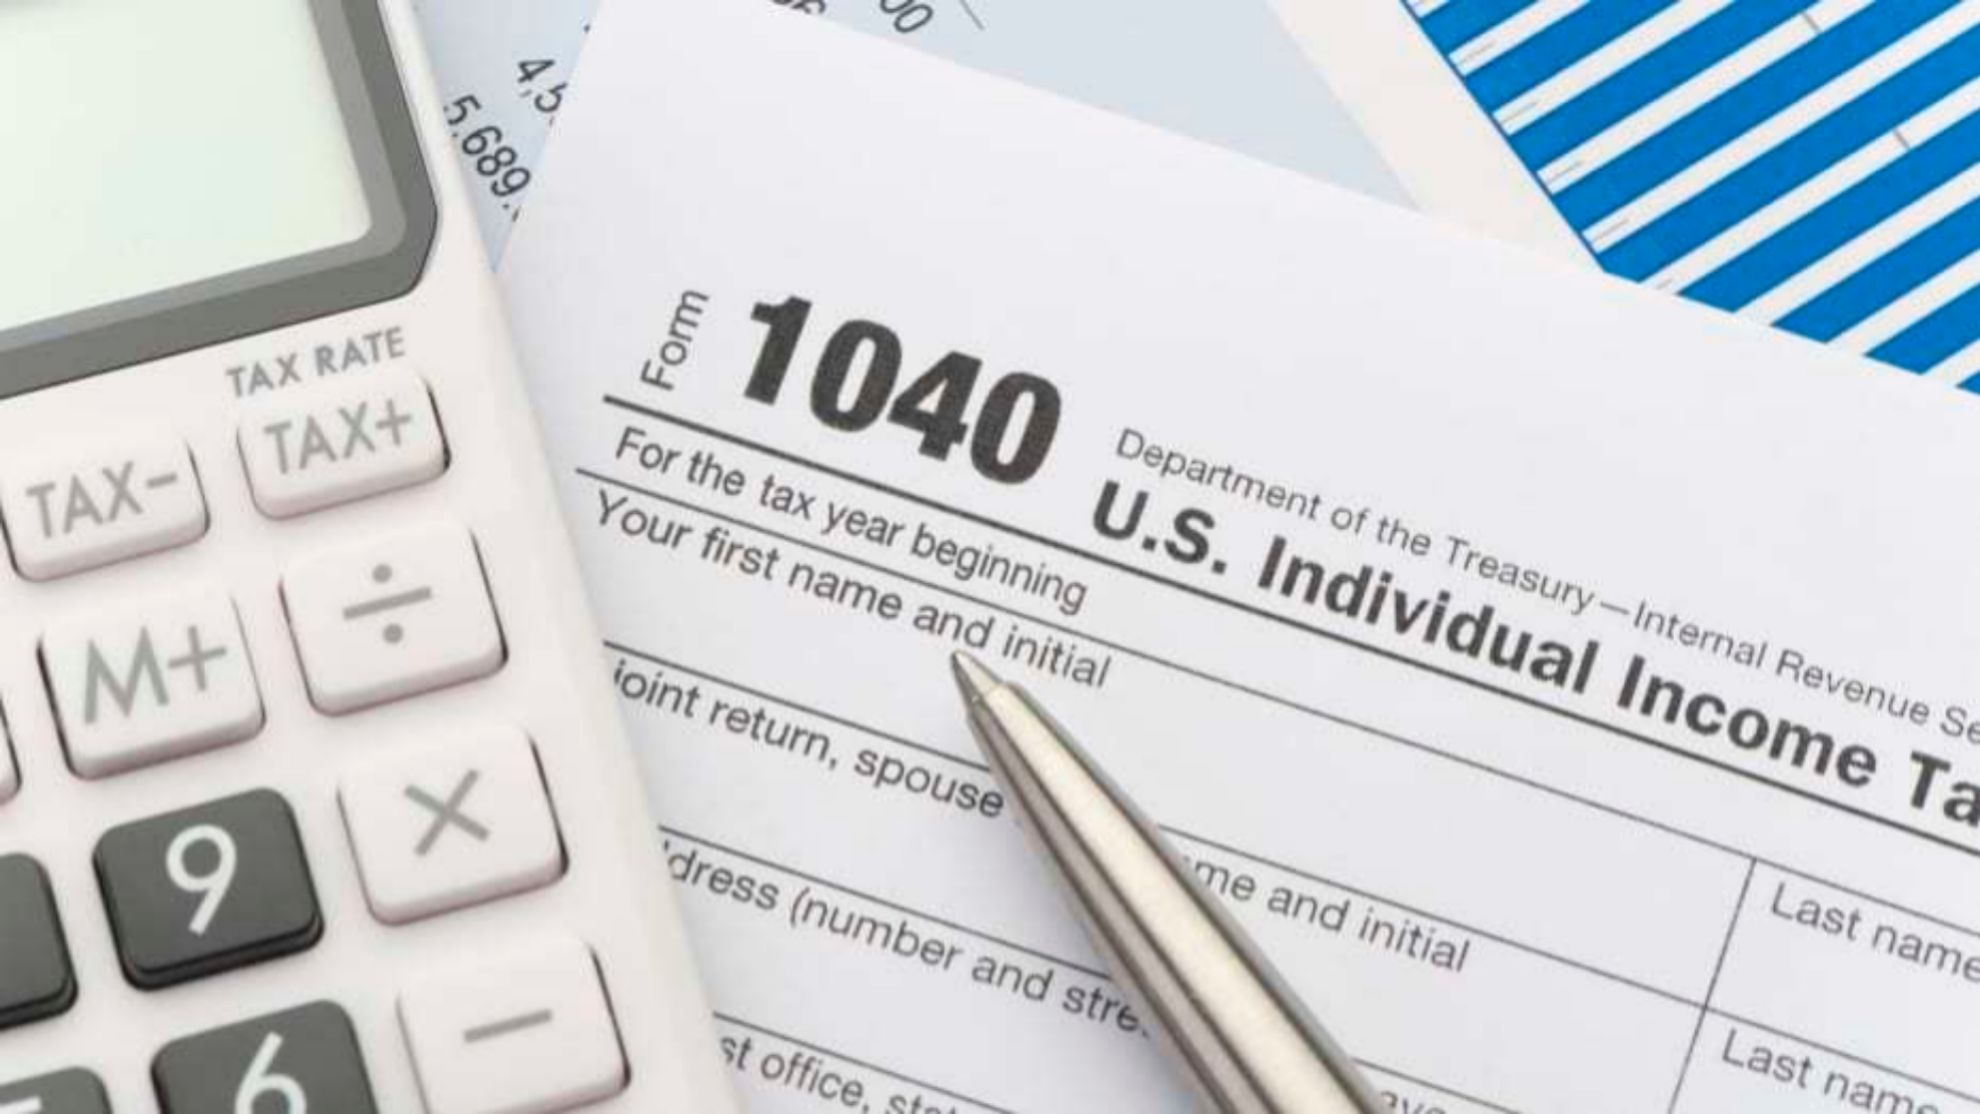 Irs Schedule 5 2022 Tax Filing Season 2022: What To Do Before January 24 | Marca